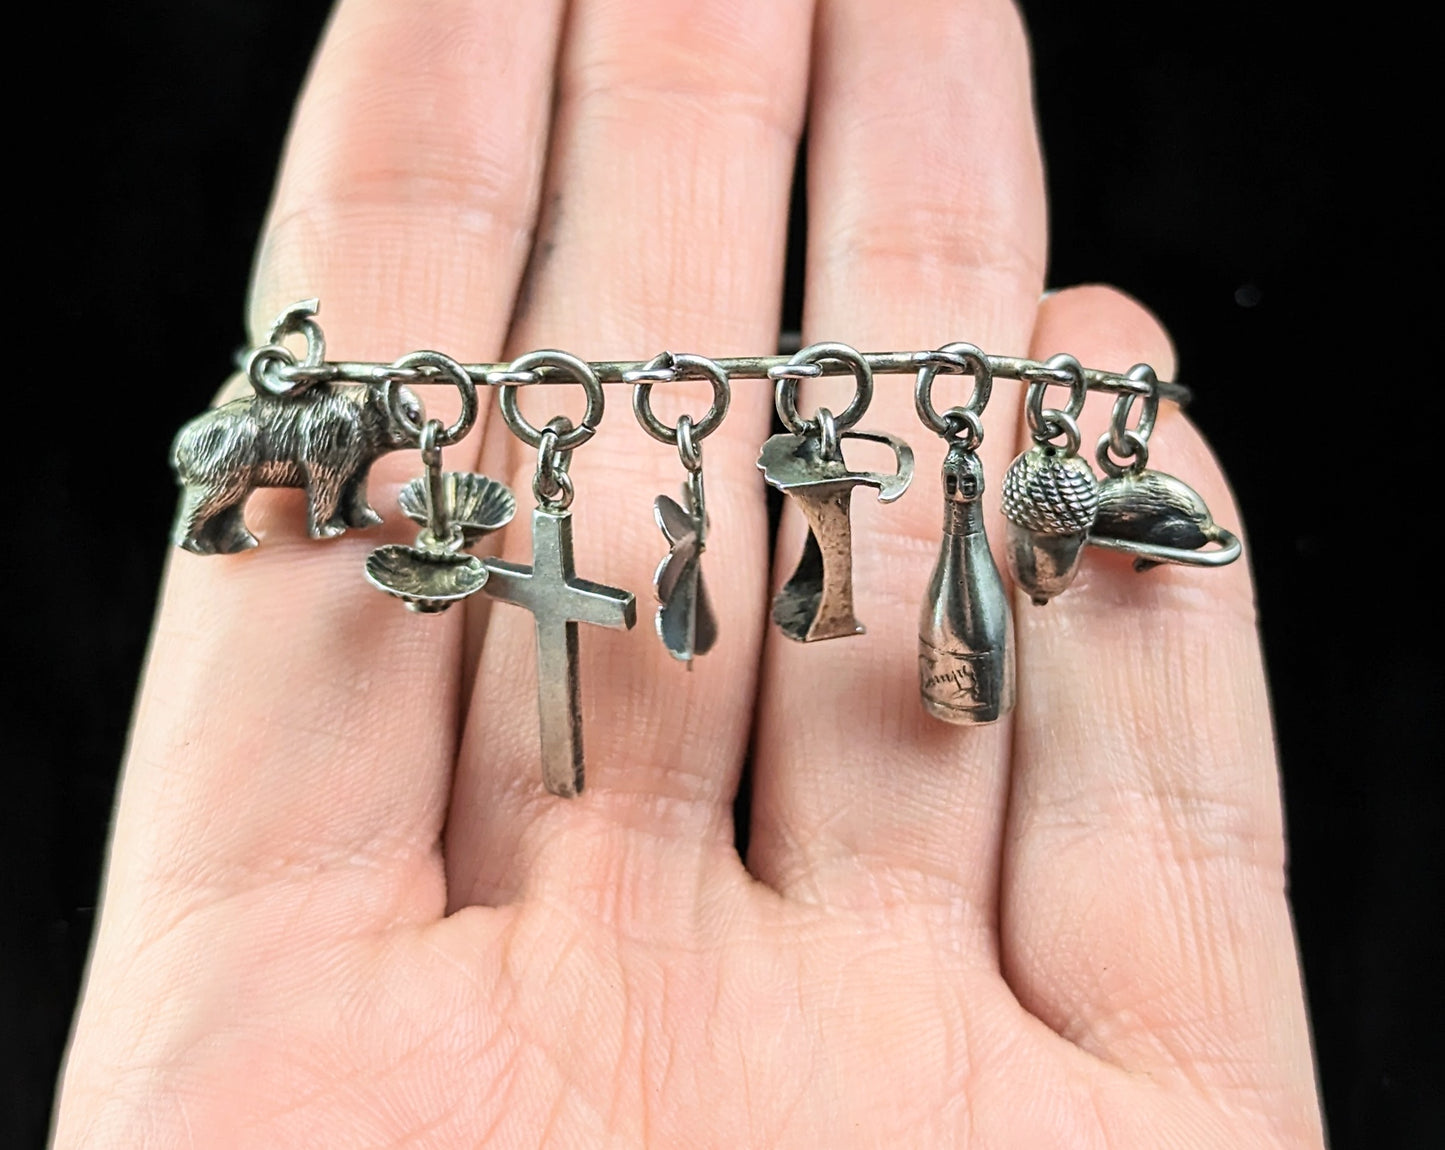 Antique Victorian sterling silver charm bracelet, Bangle, Charms